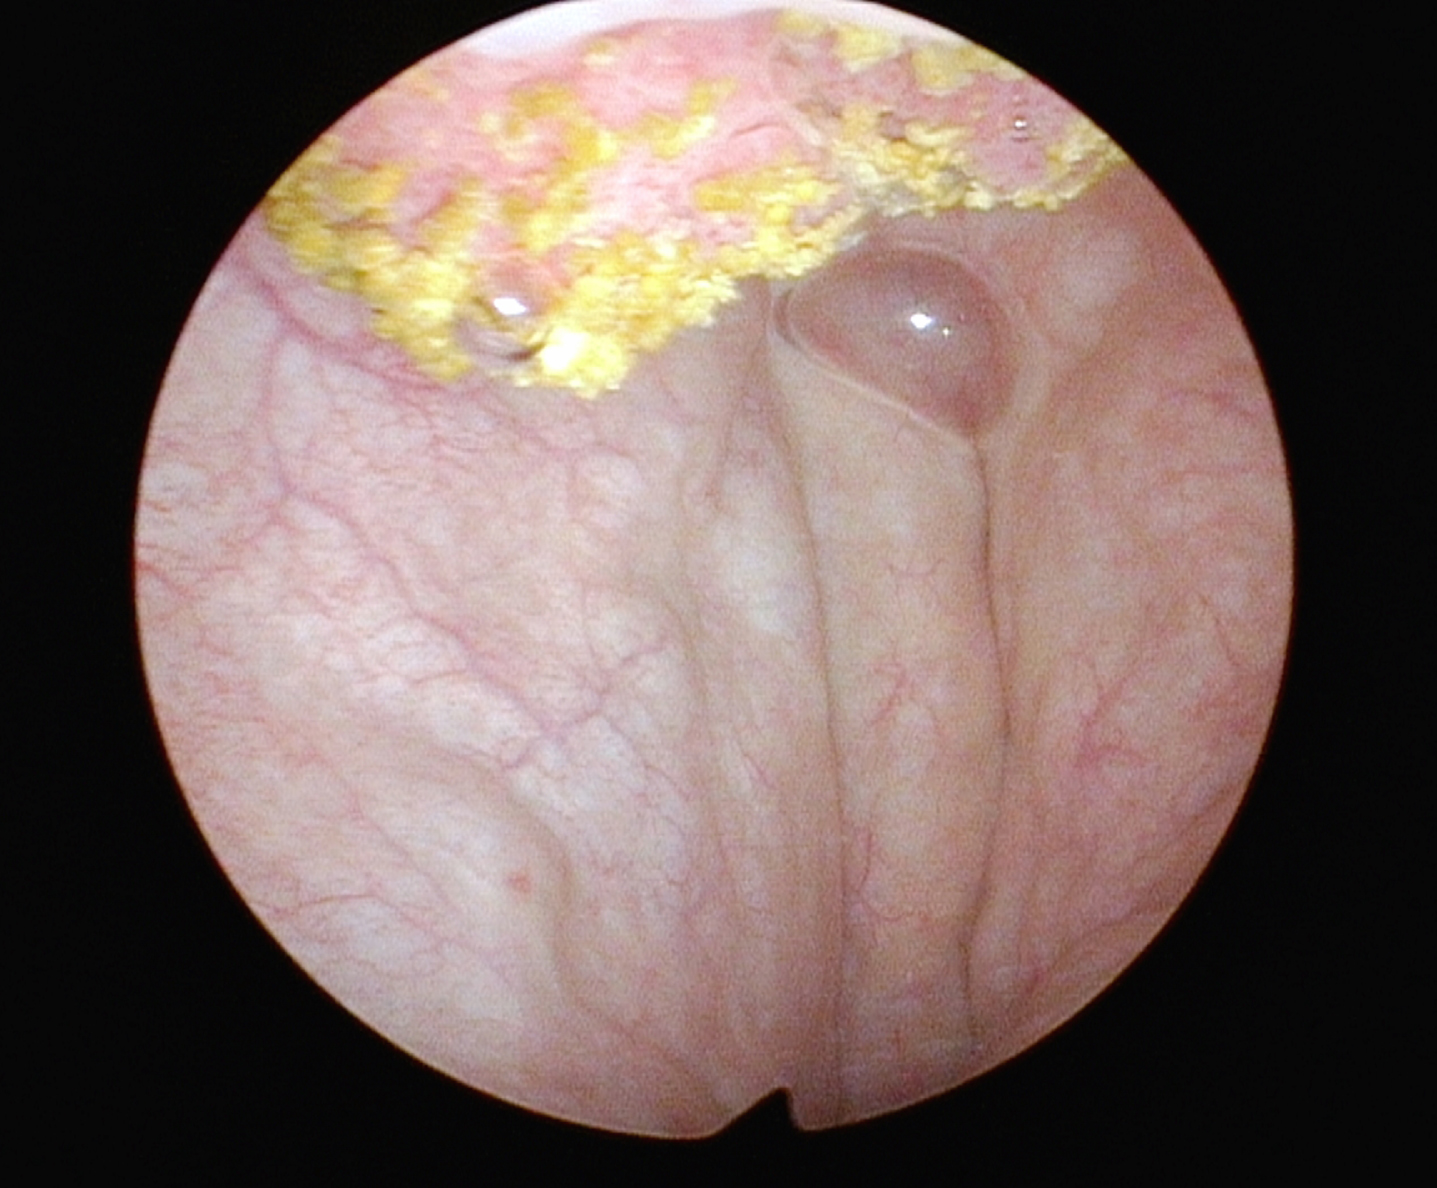 Cystoscopic appearance with 70 degree lens allows visualization of some of the tumor.